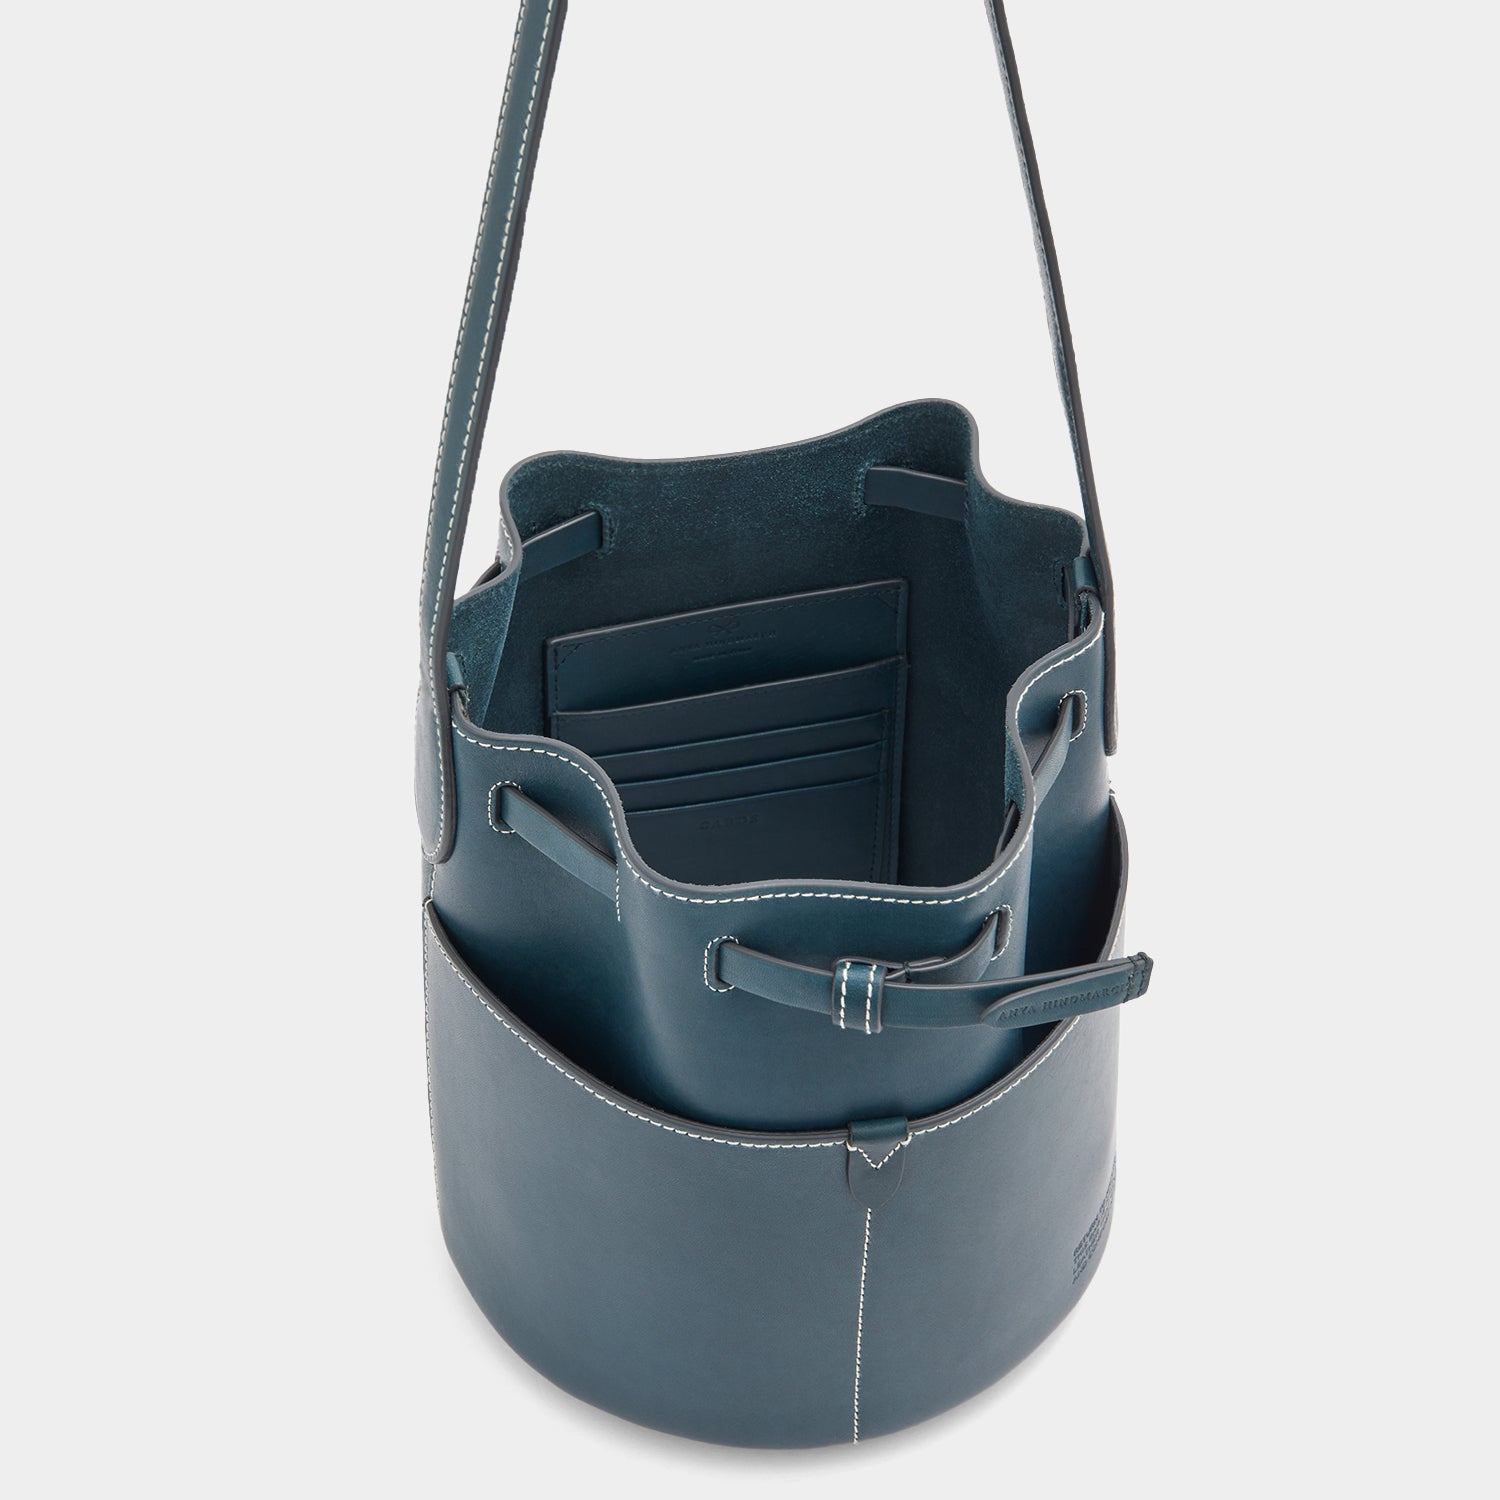 Return to Nature Small Bucket Bag -

                  
                    Compostable Leather in Dark Holly -
                  

                  Anya Hindmarch US
